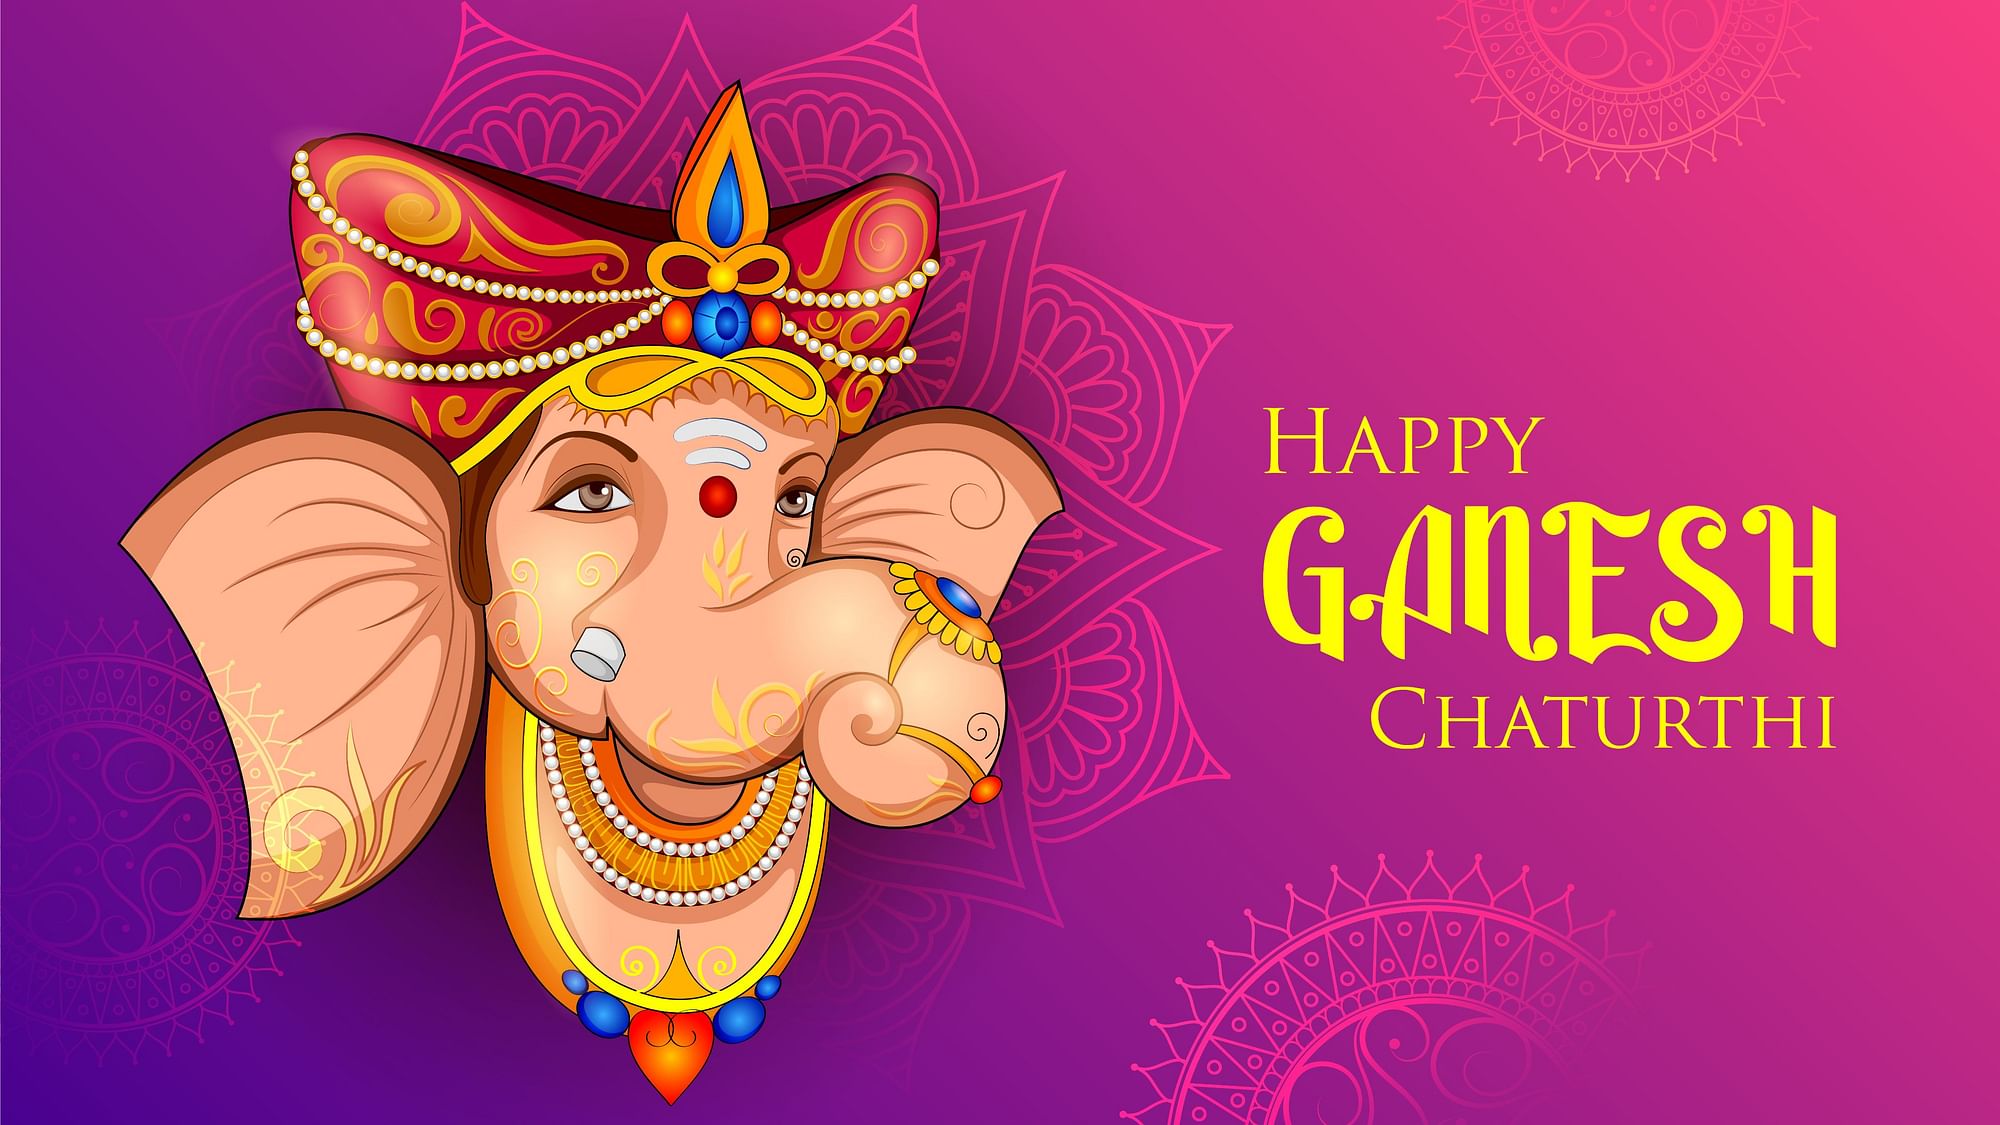 Ganesh Chaturthi 2020: Here are some images, quotes, messages for you to send your friends, relatives on this auspicious occasion.